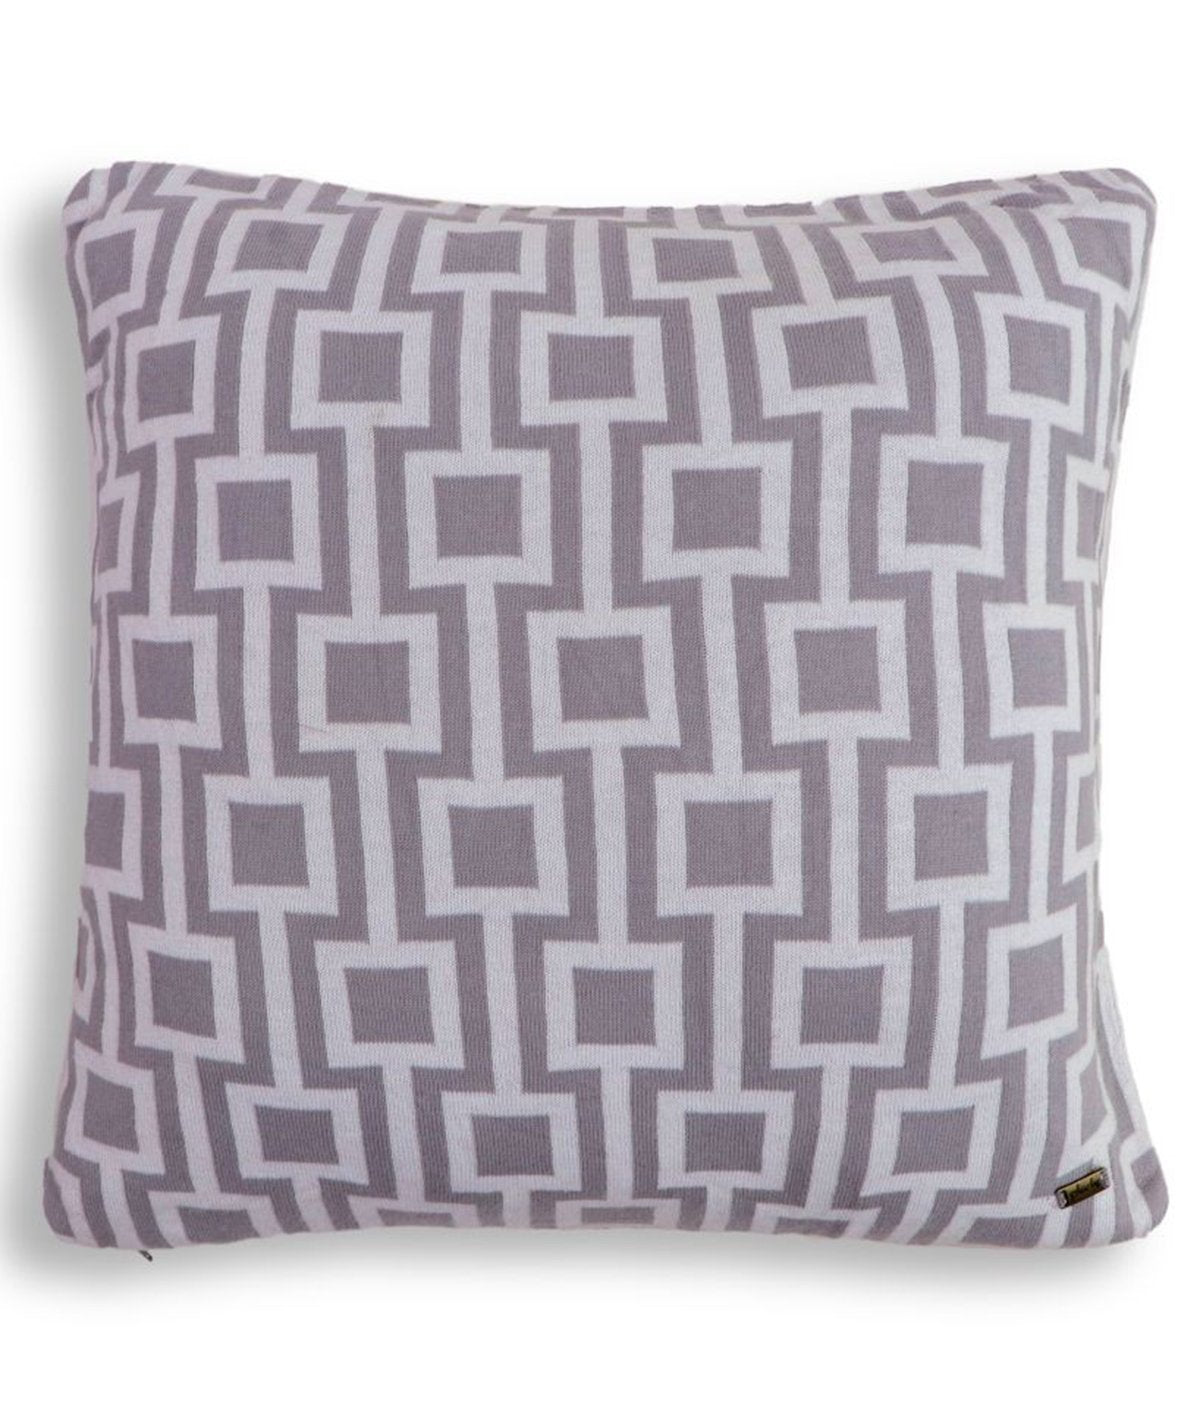 Box Cotton Knitted Decorative White & Grey Color 20 x 20 Inches Cushion Cover